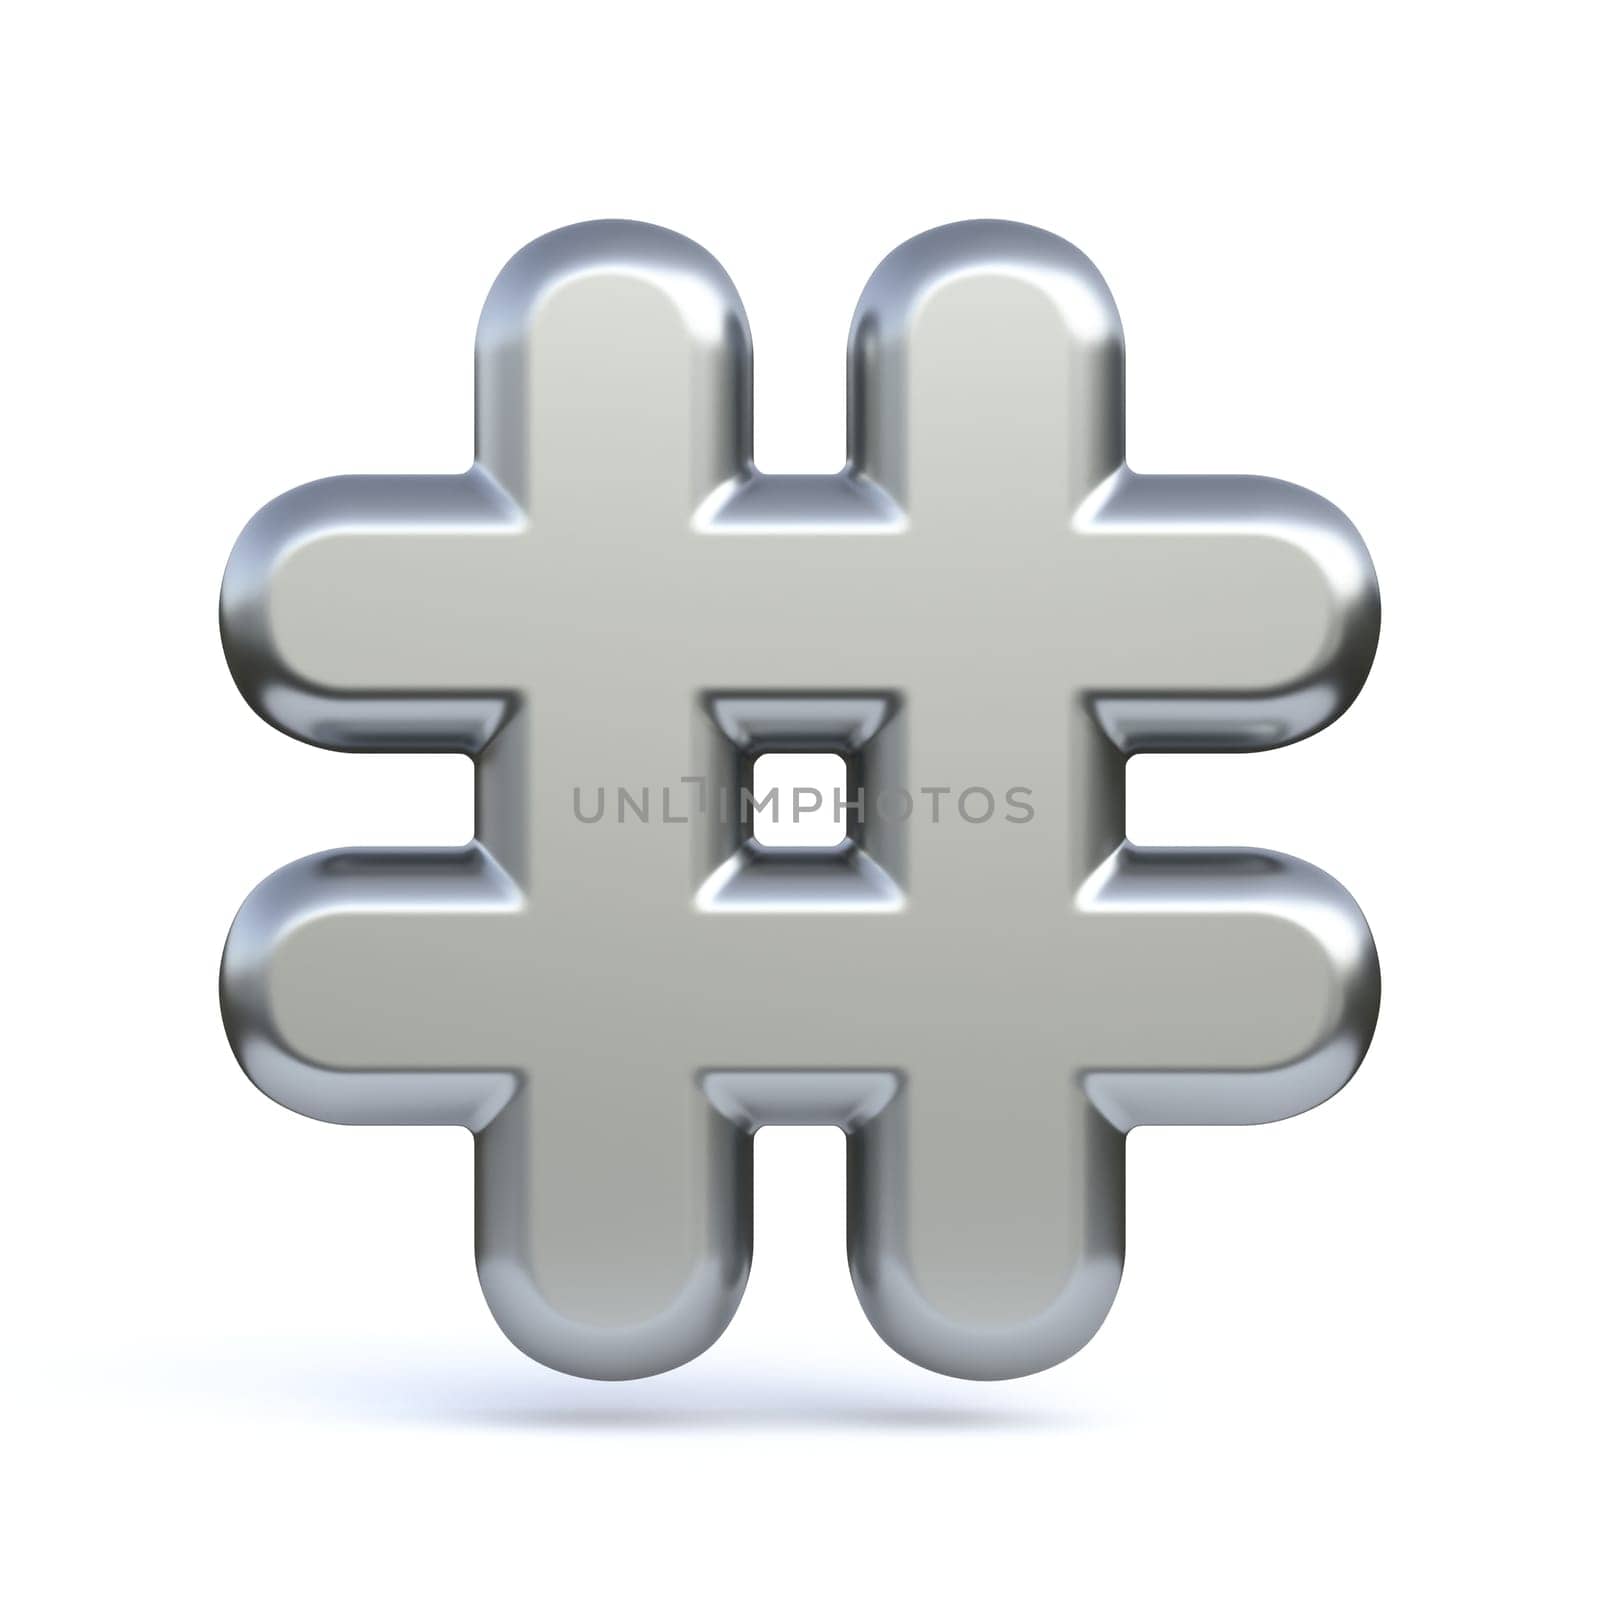 Hashtag sign 3D rendering illustration isolated on white background